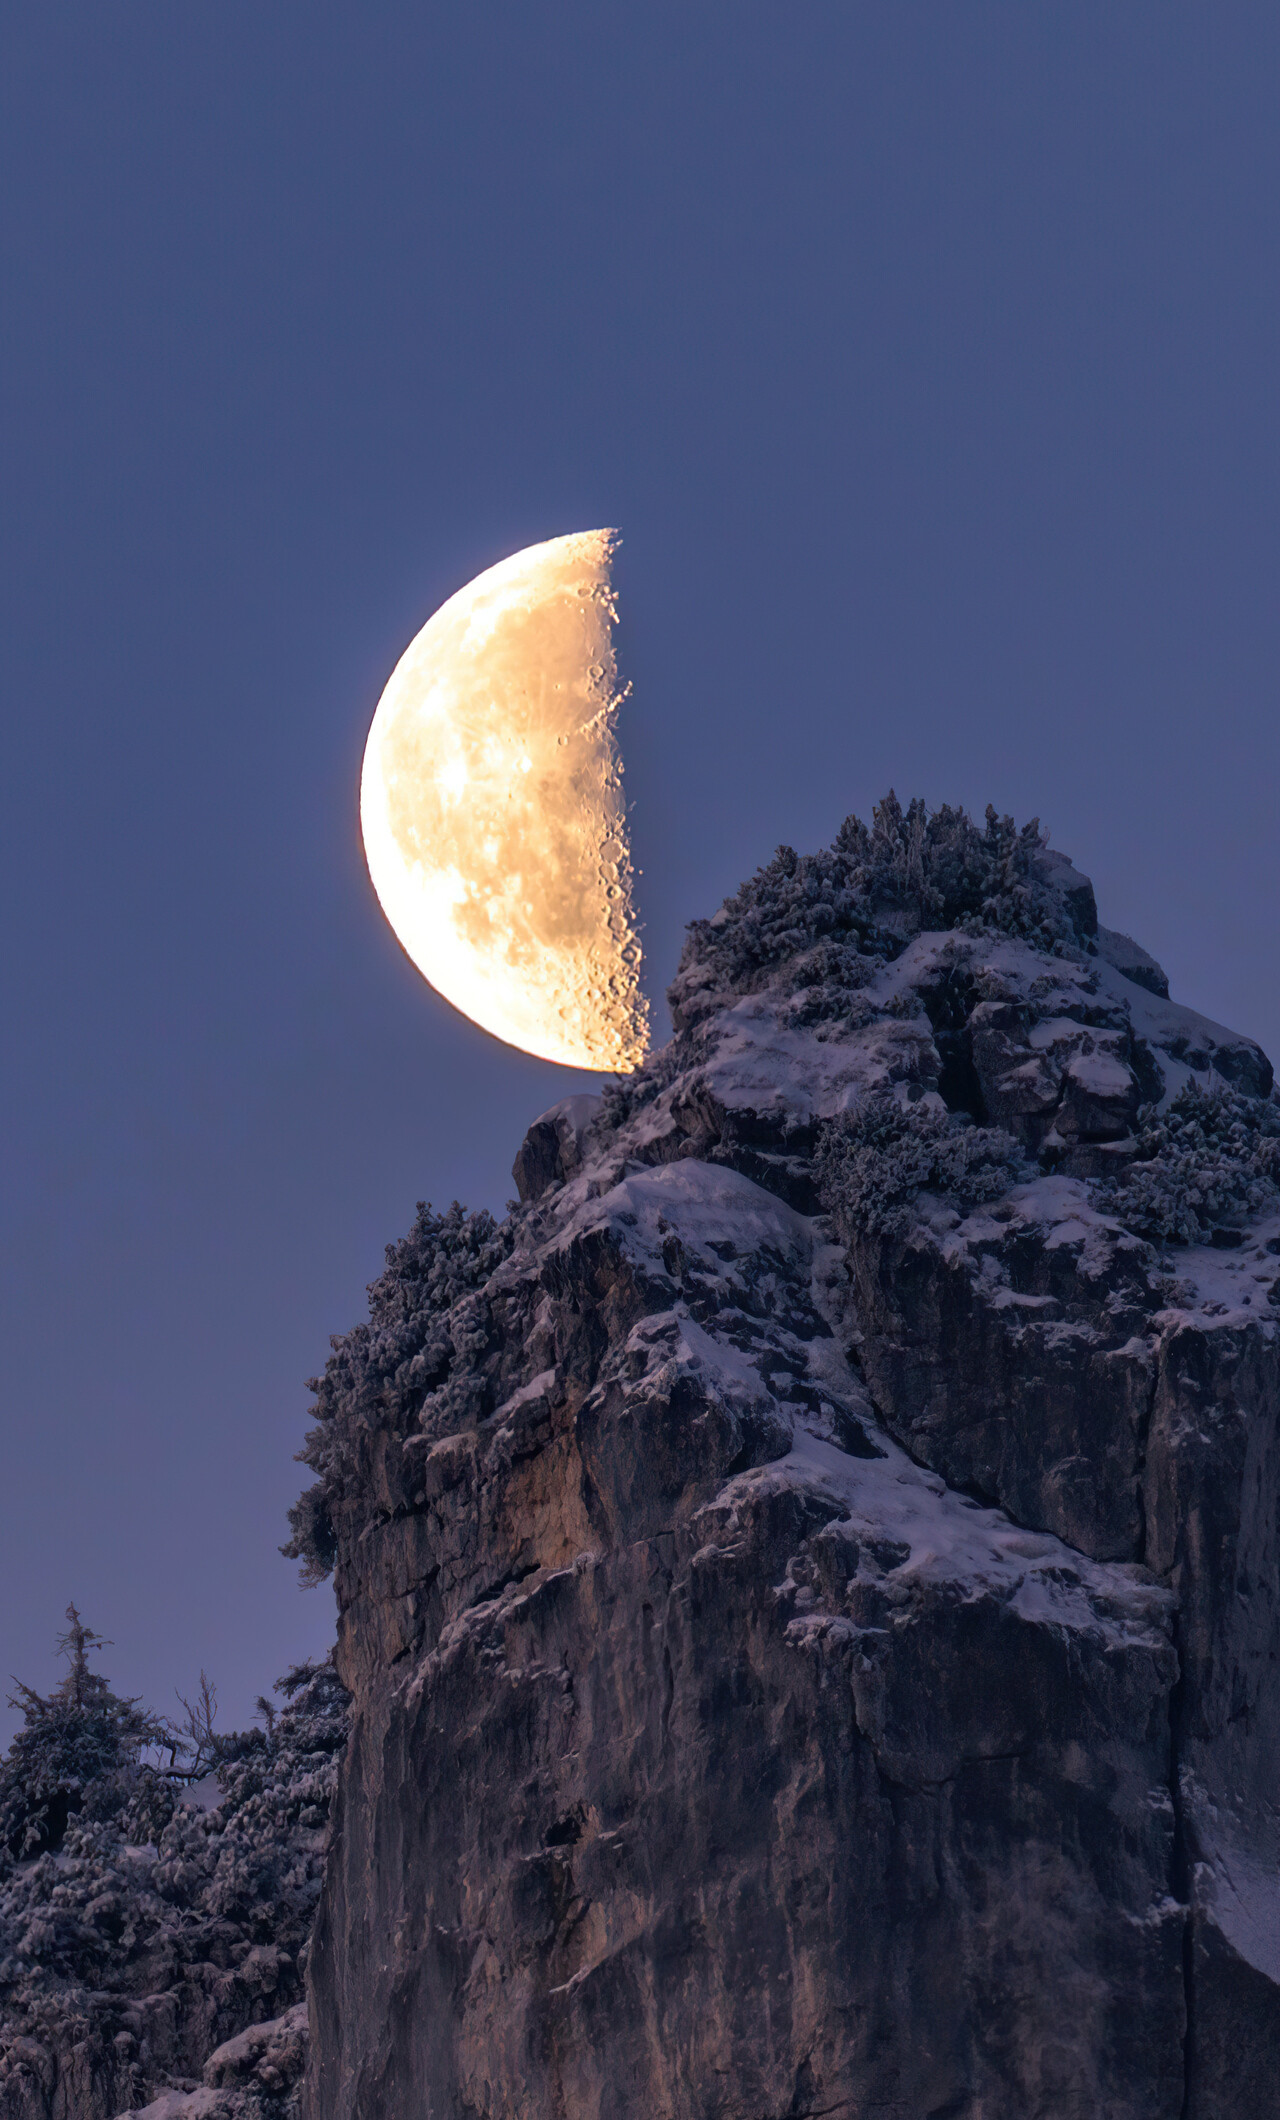 Moonlight: Last Quarter, The Moon looks like it’s half illuminated from the perspective of Earth, The Bavarian Alps. 1280x2120 HD Wallpaper.